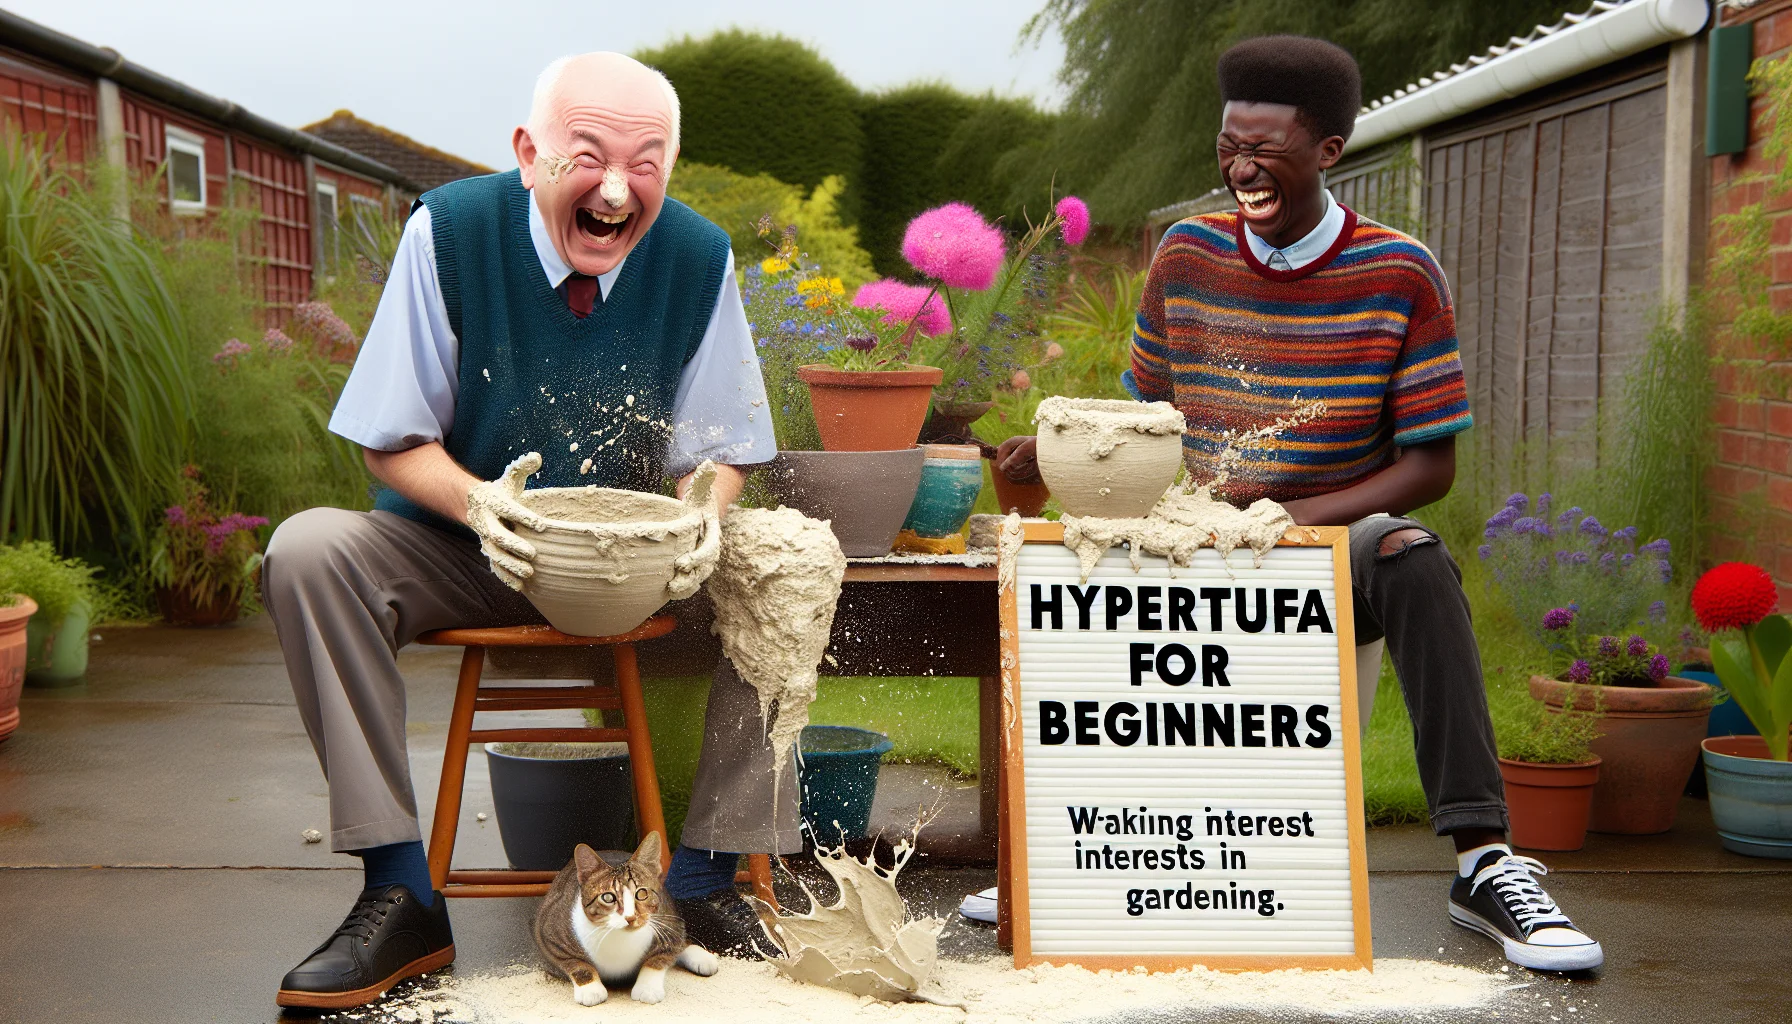 Create a humorous and realistic image that represents the joy and simplicity of starting with hypertufa in gardening. The scene can entail a jovial Caucasian elderly man and a Black teenager laughing heartily as they accidentally mess up their first hypertufa pot. The hypertufa mixture is spilling everywhere, and some even lands on the nose of an unsuspecting tabby cat standing by. A signboard on the side should read 'Hypertufa for Beginners' waking interest in gardening activities.